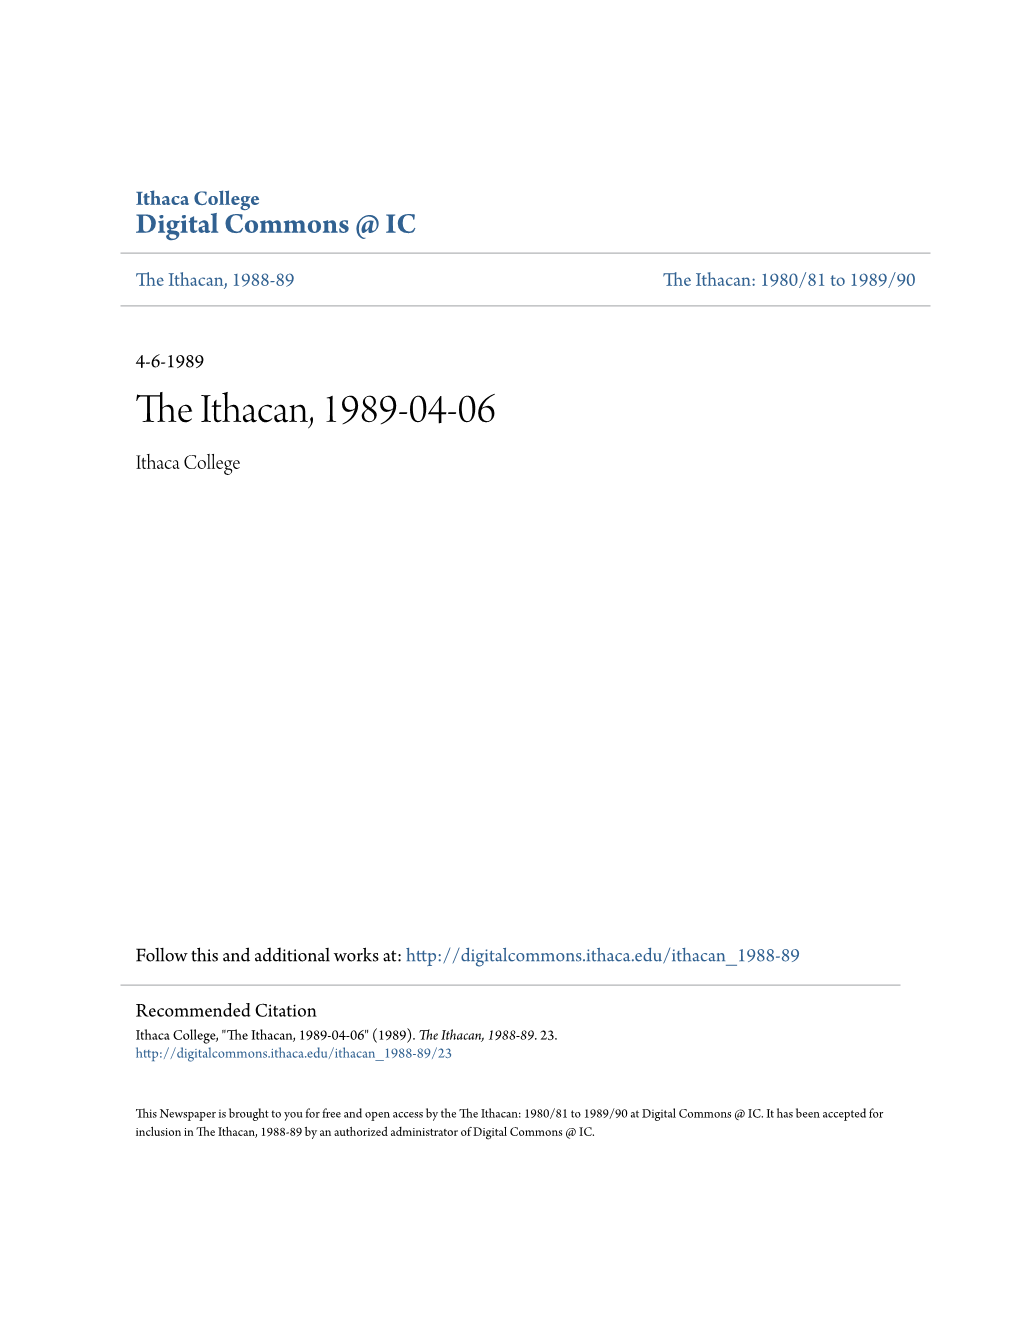 The Ithacan, 1989-04-06